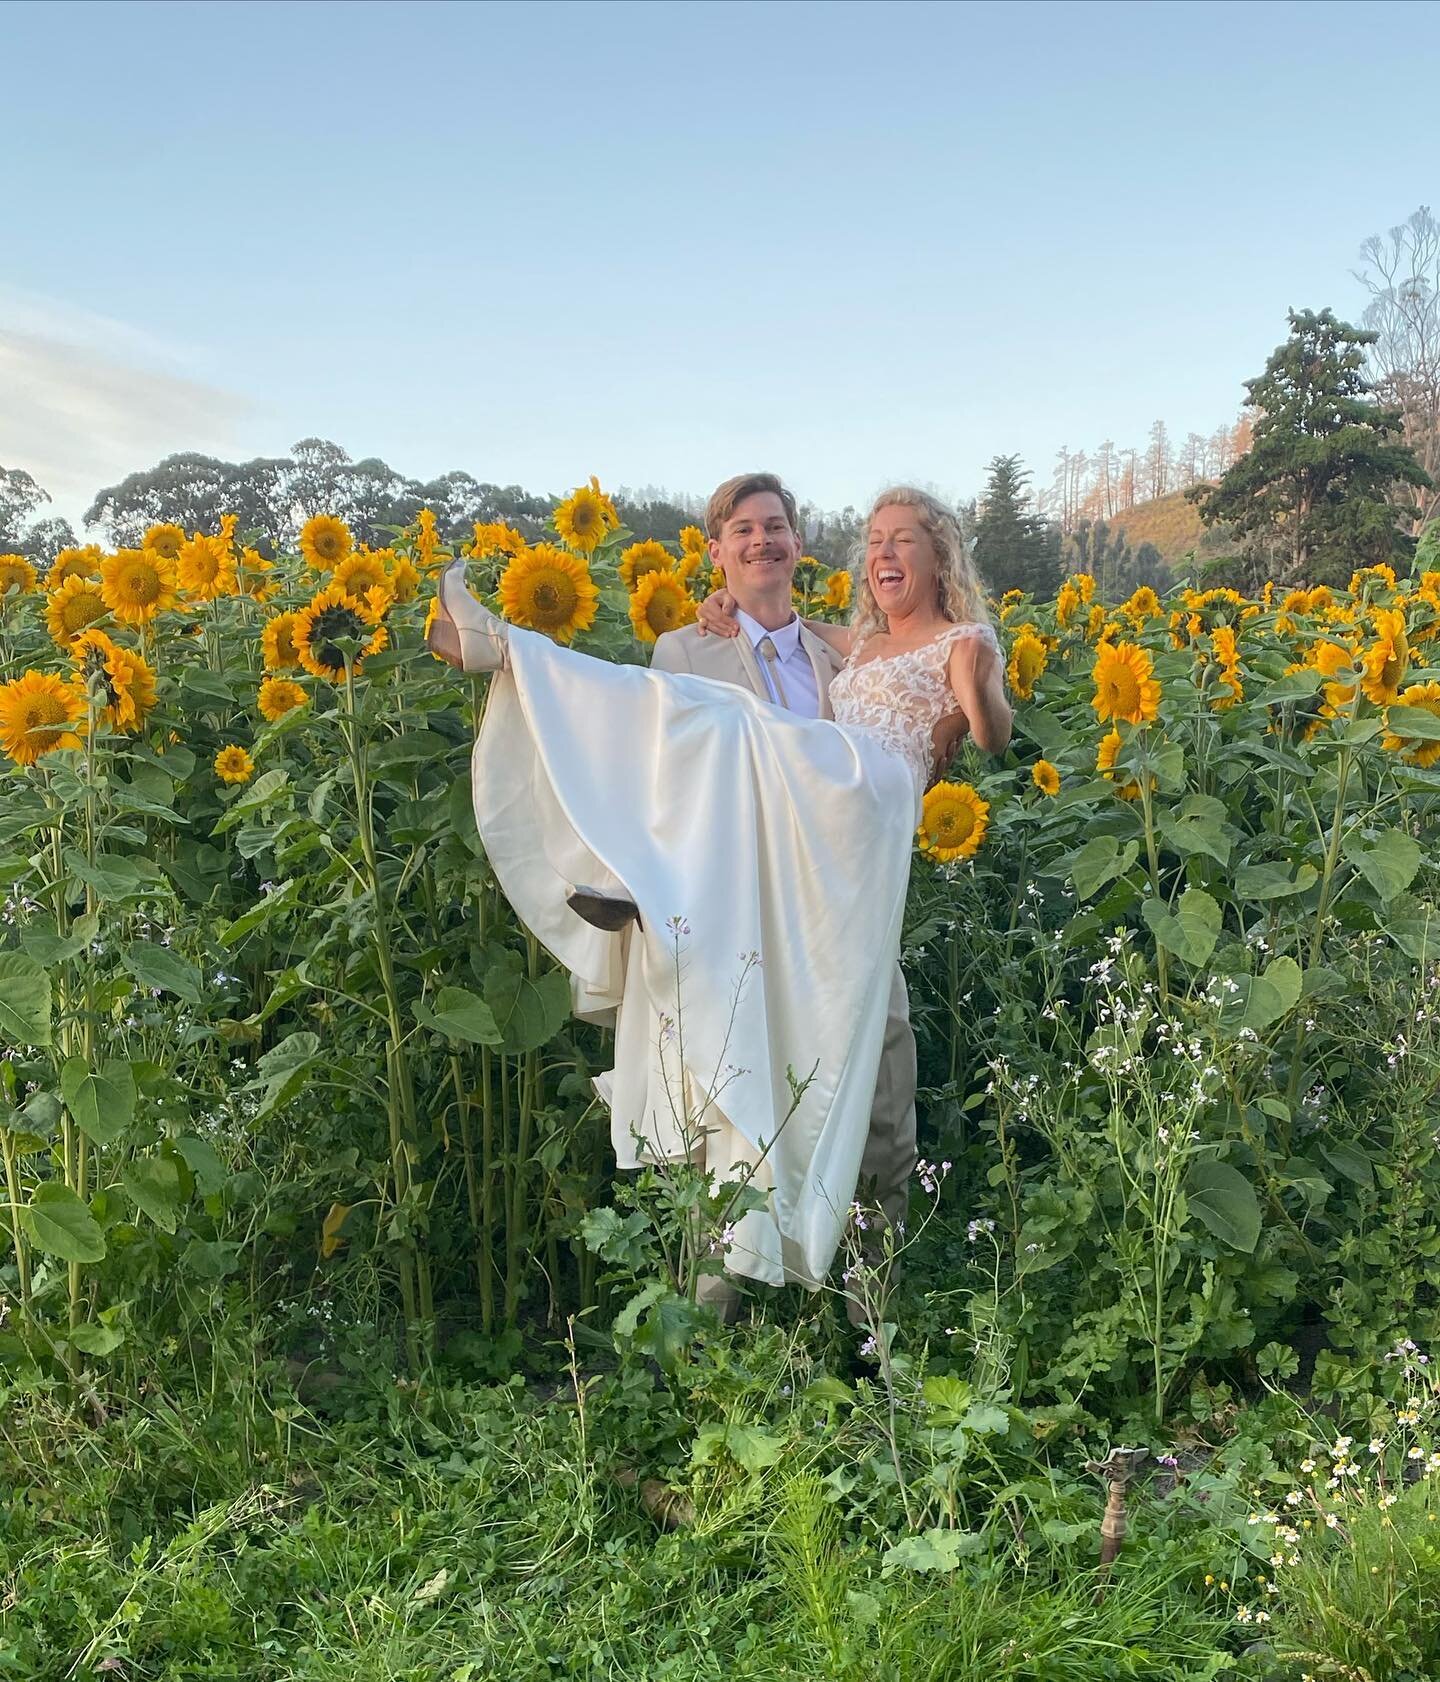 After surfing 3 hours during the Solar Eclipse and getting hitched in a valley they know so very well among apple trees that survived the 2020 SZU complex fire, Cassie and Grant danced the night away surrounded by the ones they love. It was a magical